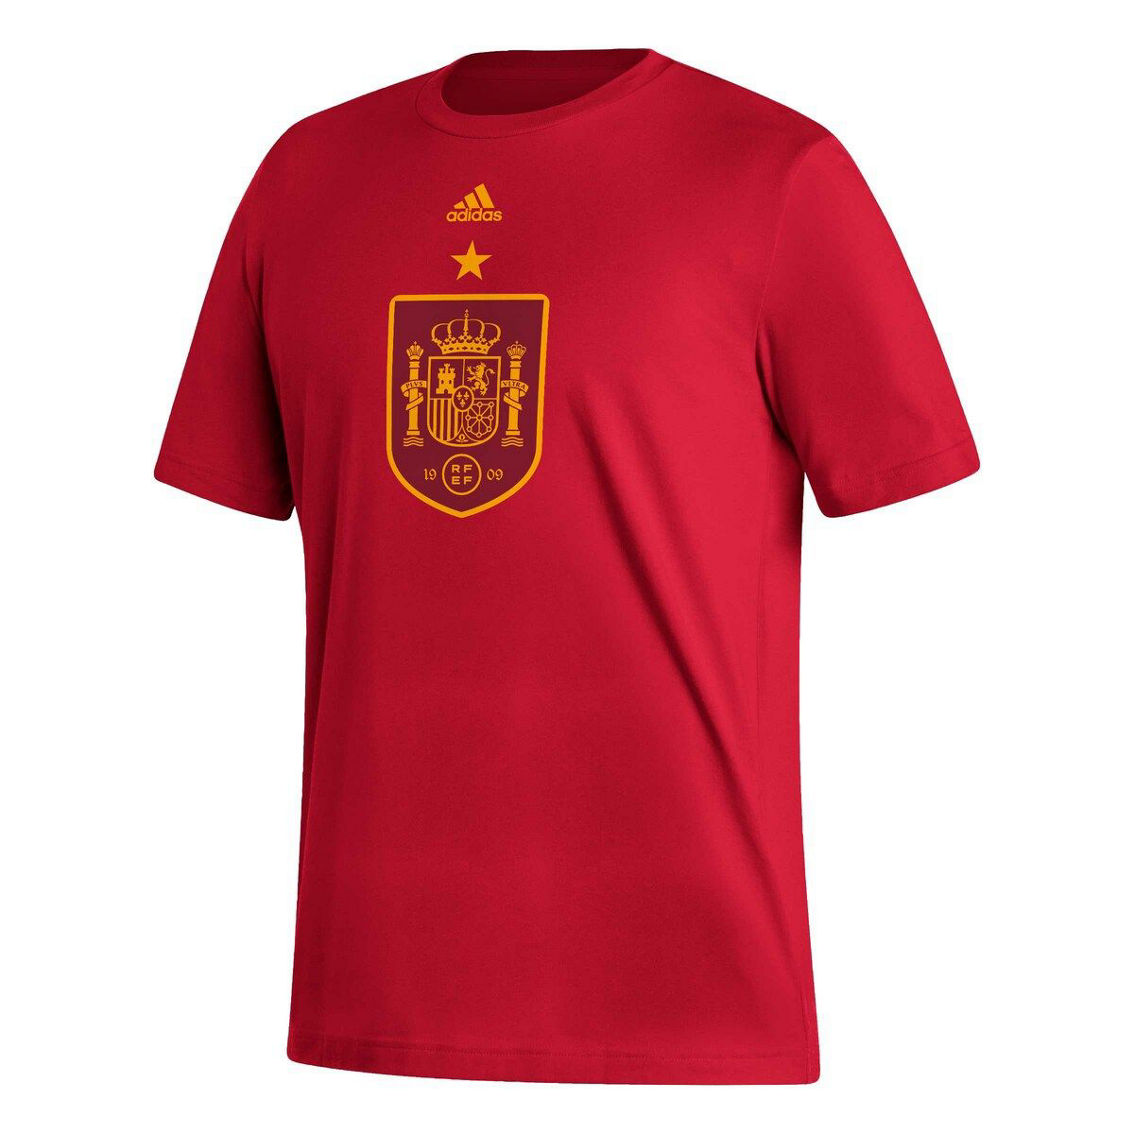 adidas Men's Red Spain National Team Vertical Back T-Shirt - Image 3 of 4